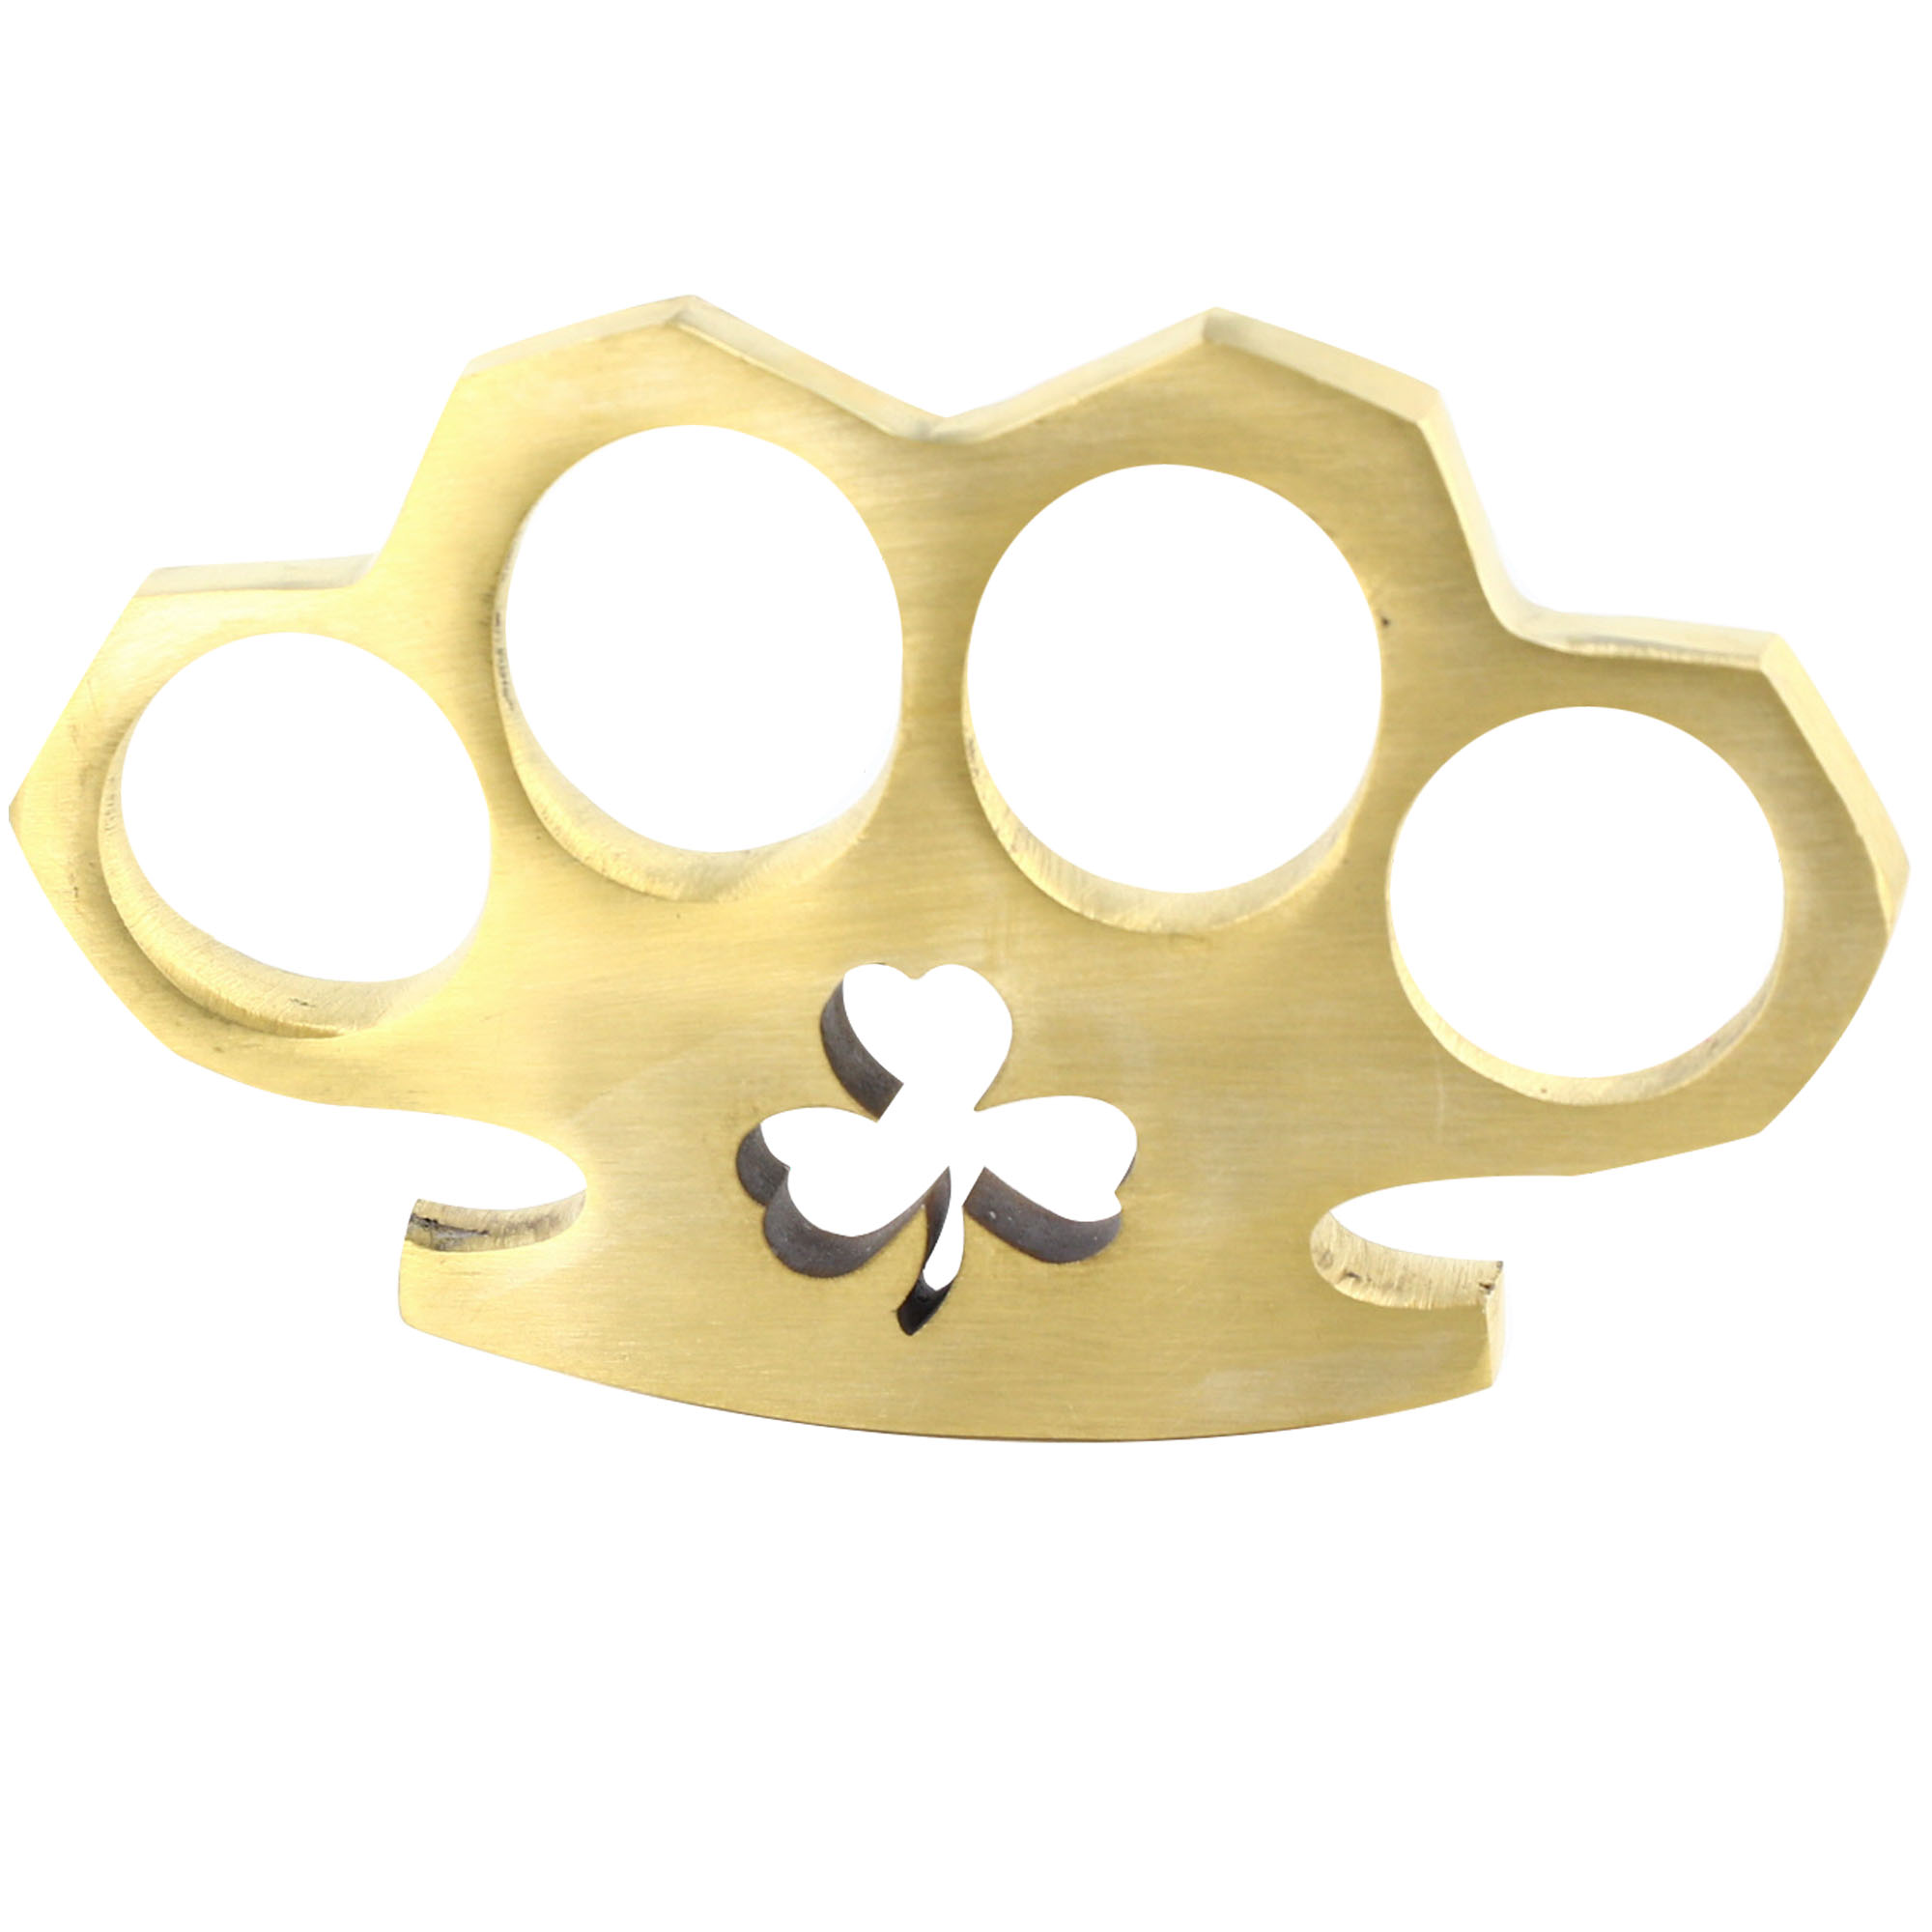 Lucky Punch 100% Pure Brass Knuckle Duster Novelty Paper Weight Knuckles